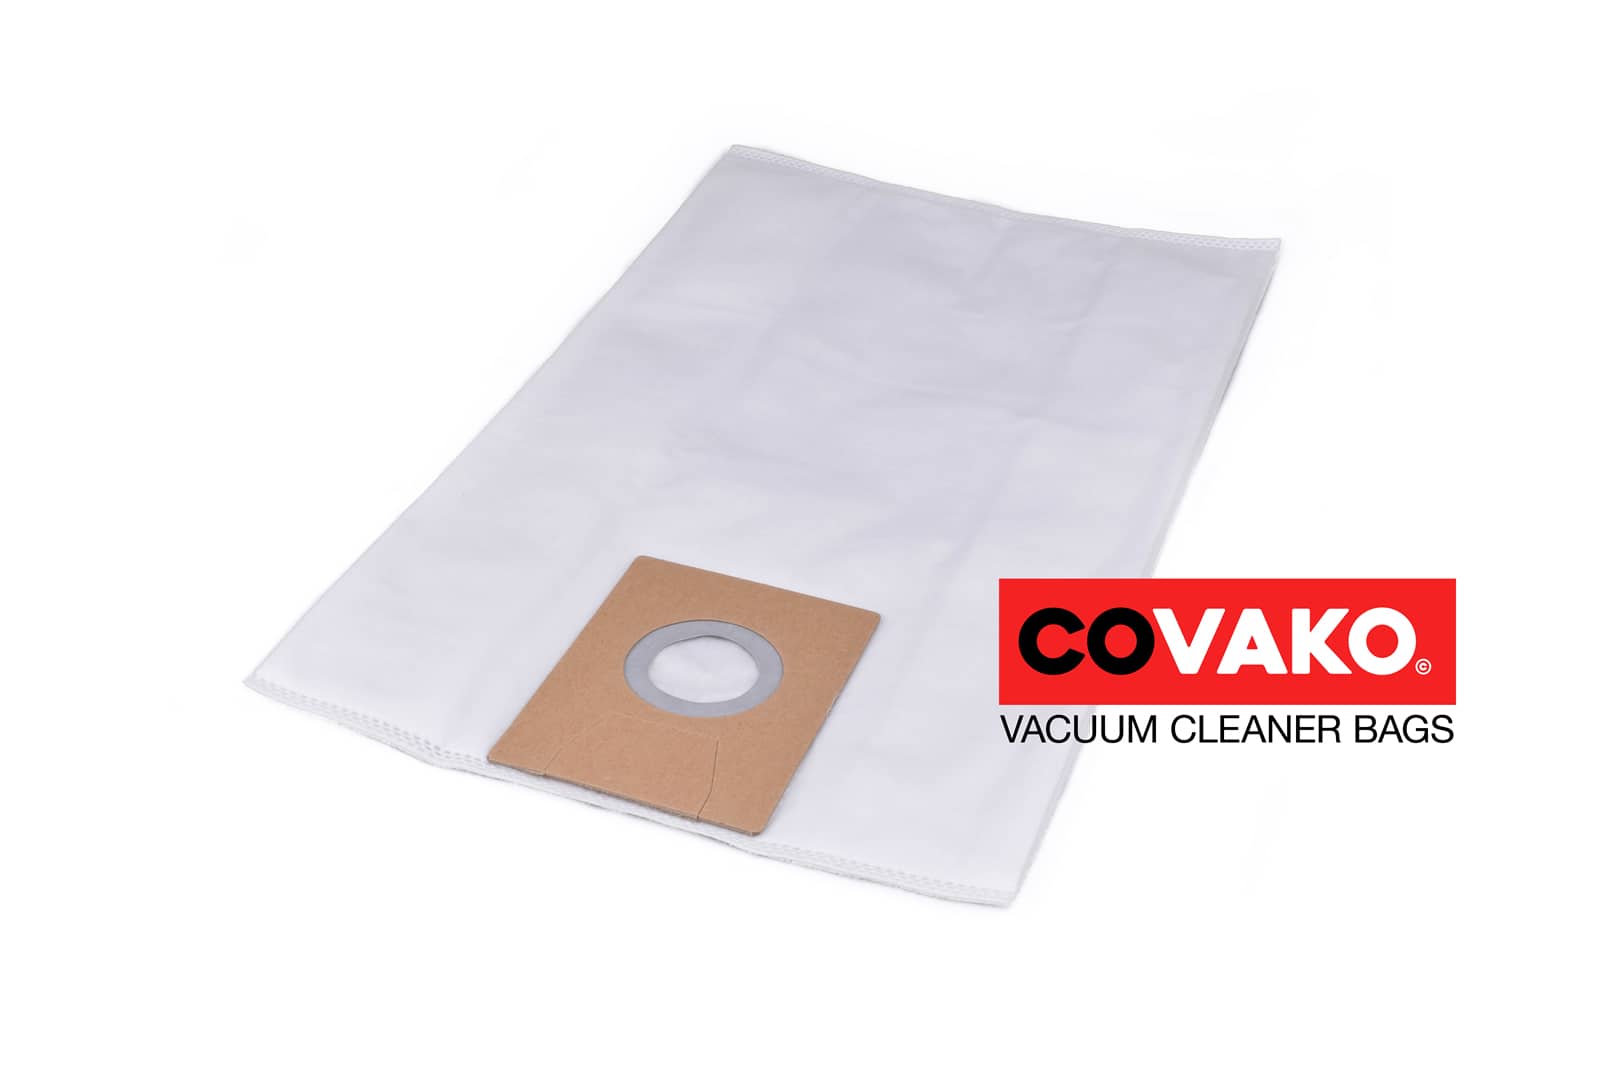 Elsea quiet A class 3.0 / Synthesis - Elsea vacuum cleaner bags